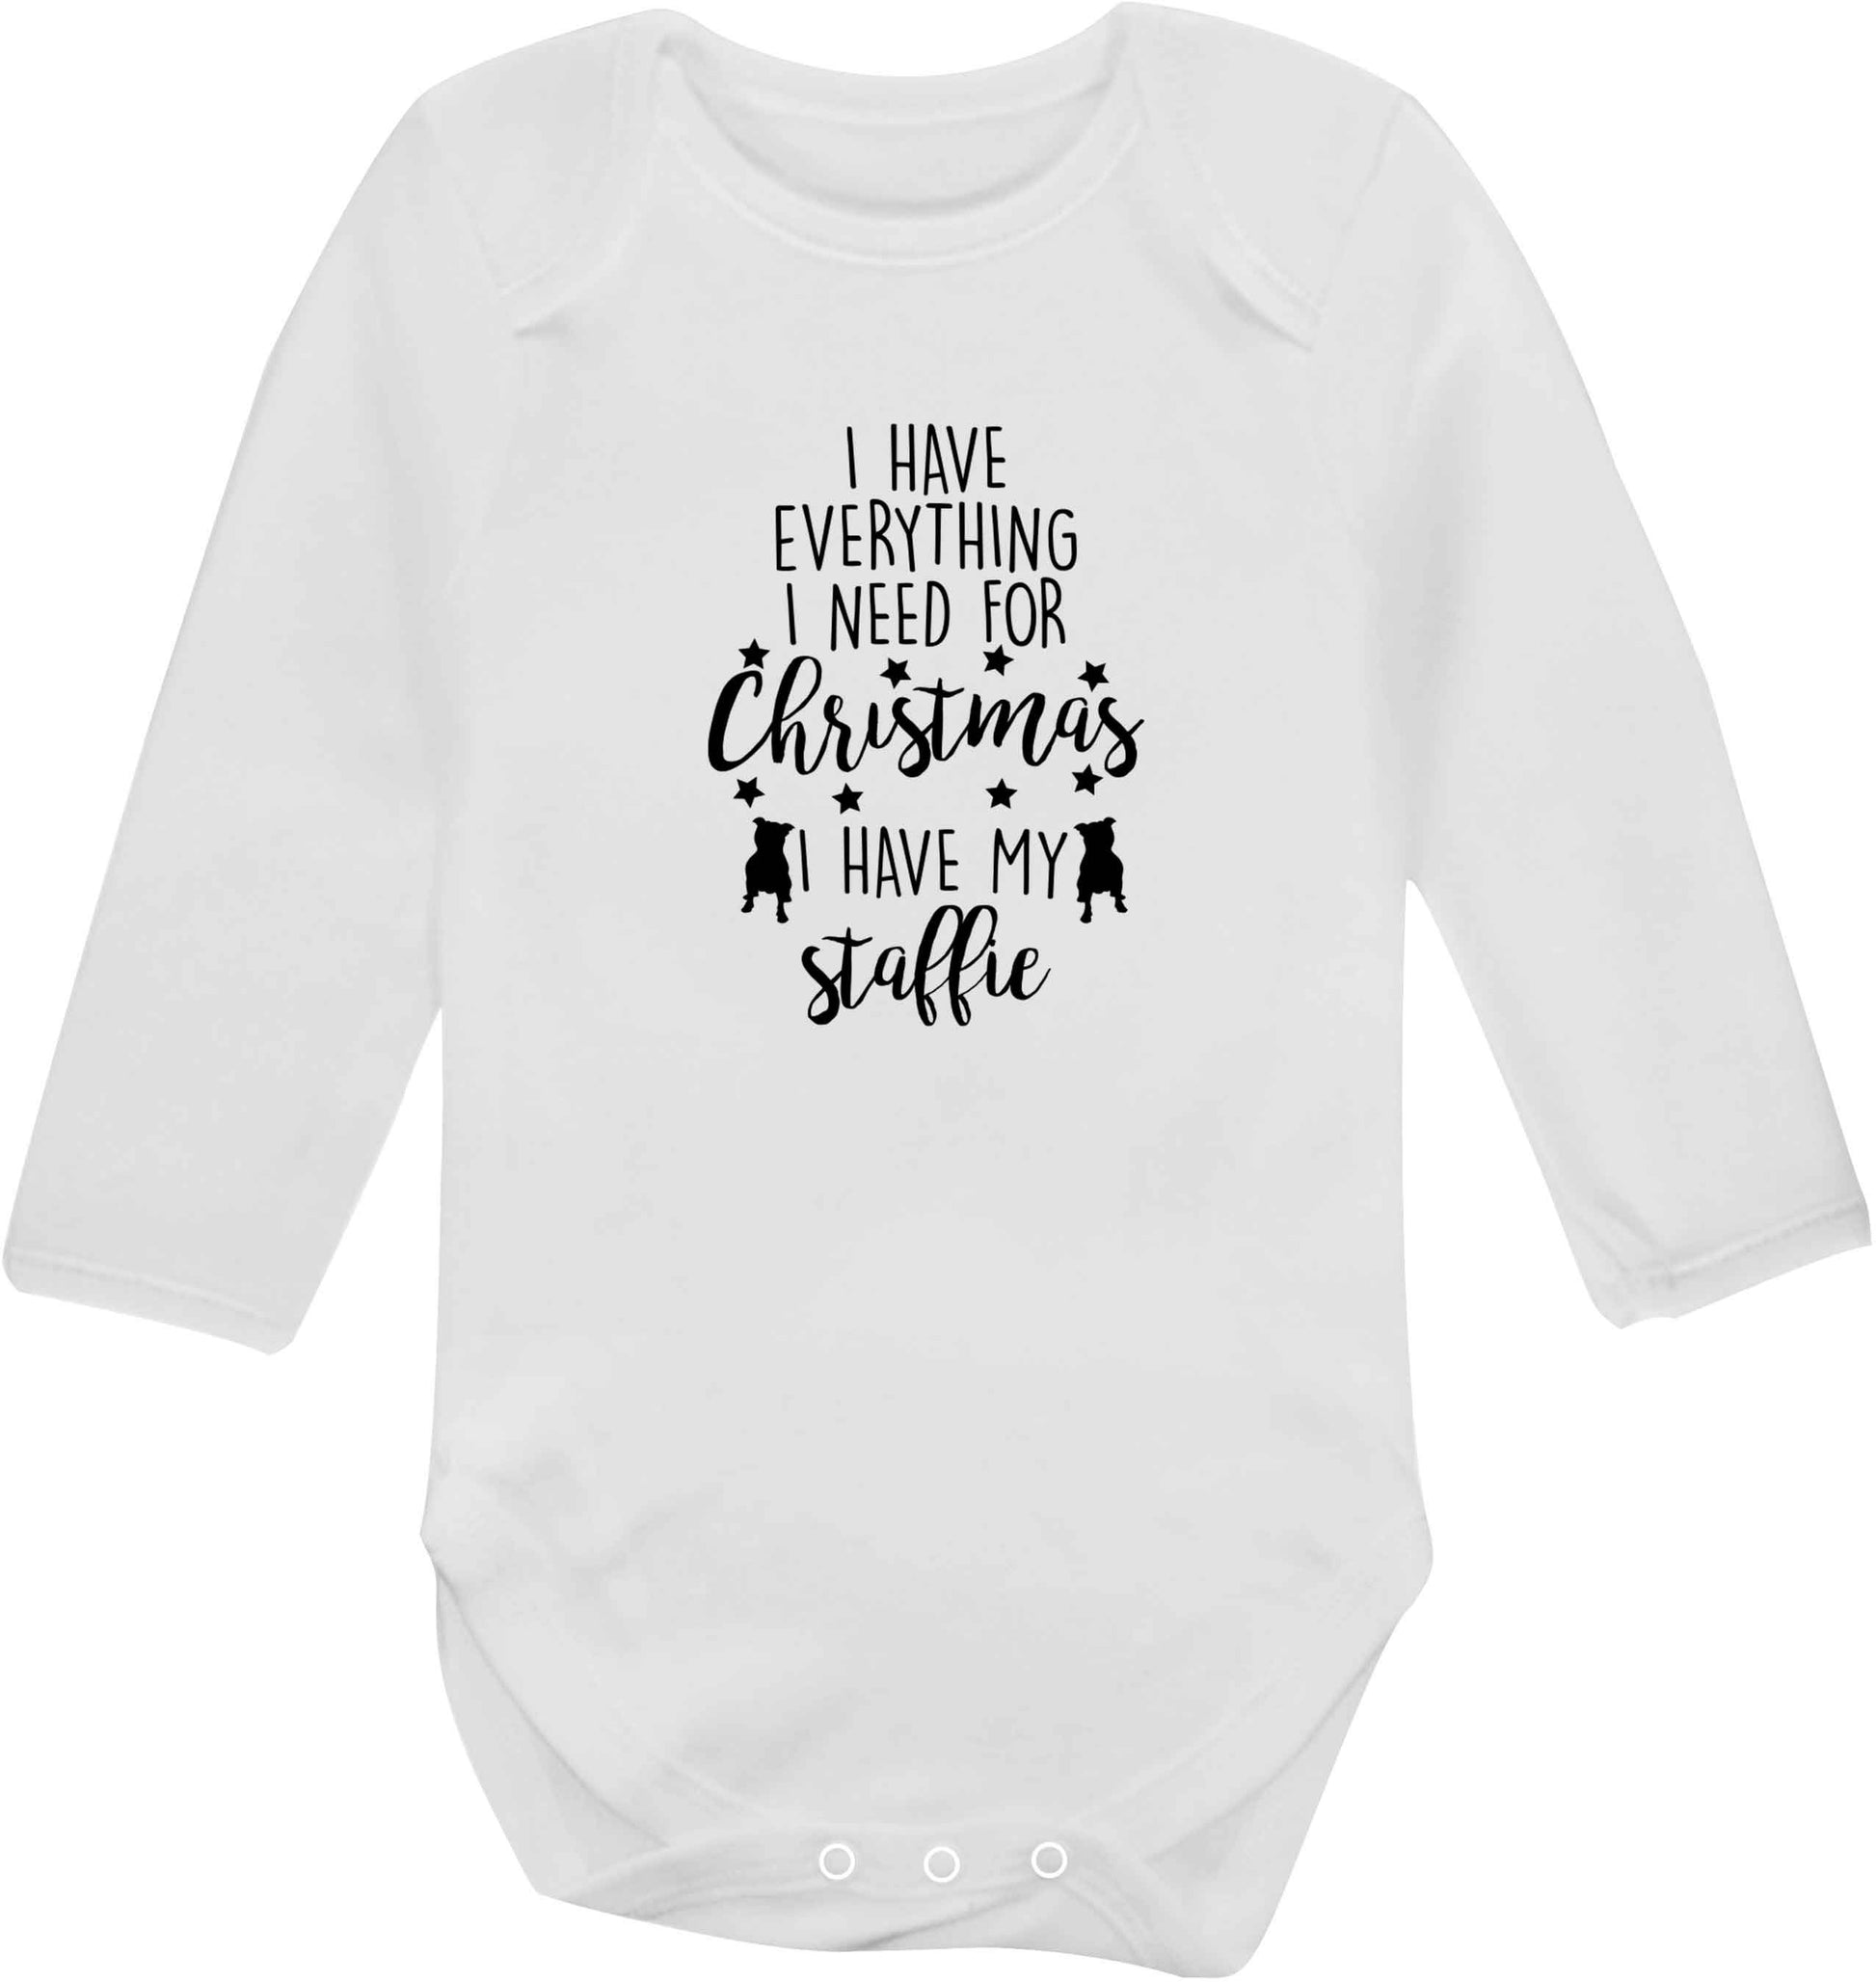 I have everything I need for Christmas I have my staffie baby vest long sleeved white 6-12 months